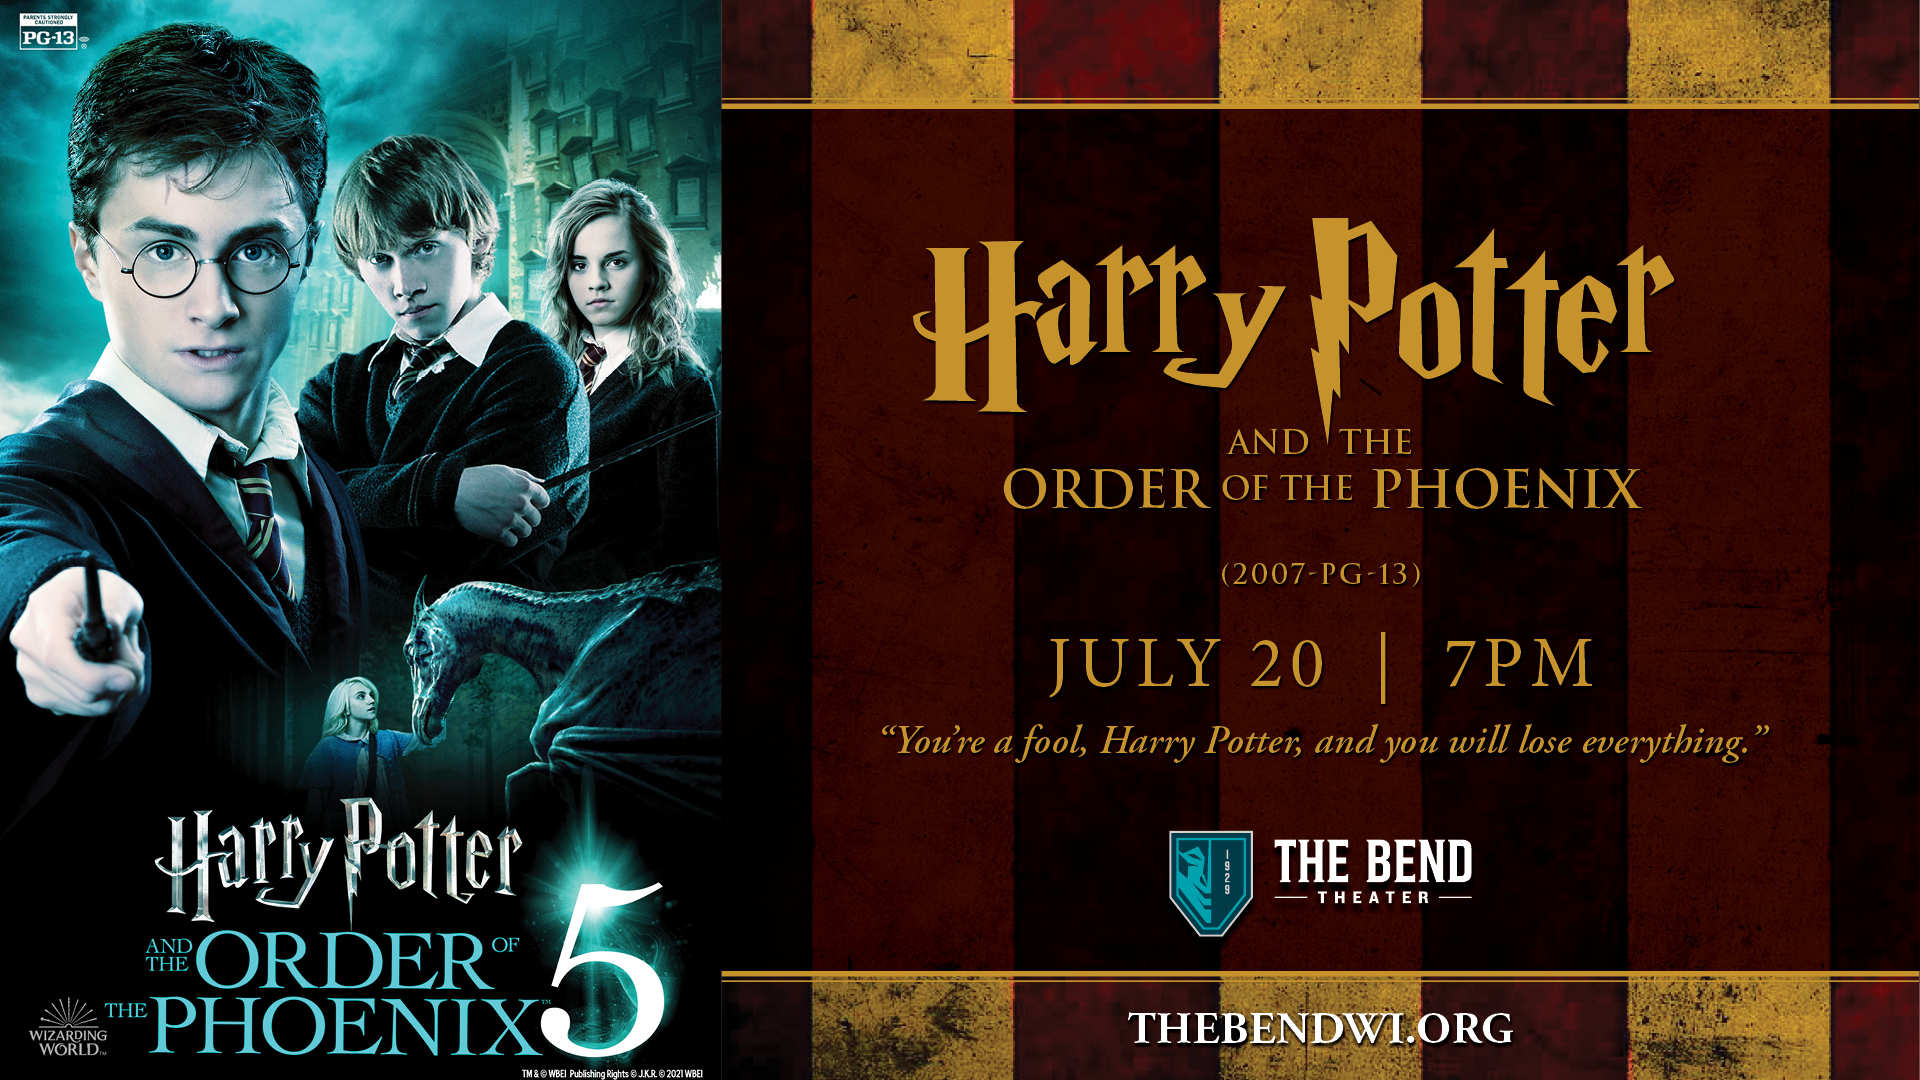 Wizarding World Nights at The Bend Theater: Harry Potter and The Order of the Phoenix (2007 - PG-13)